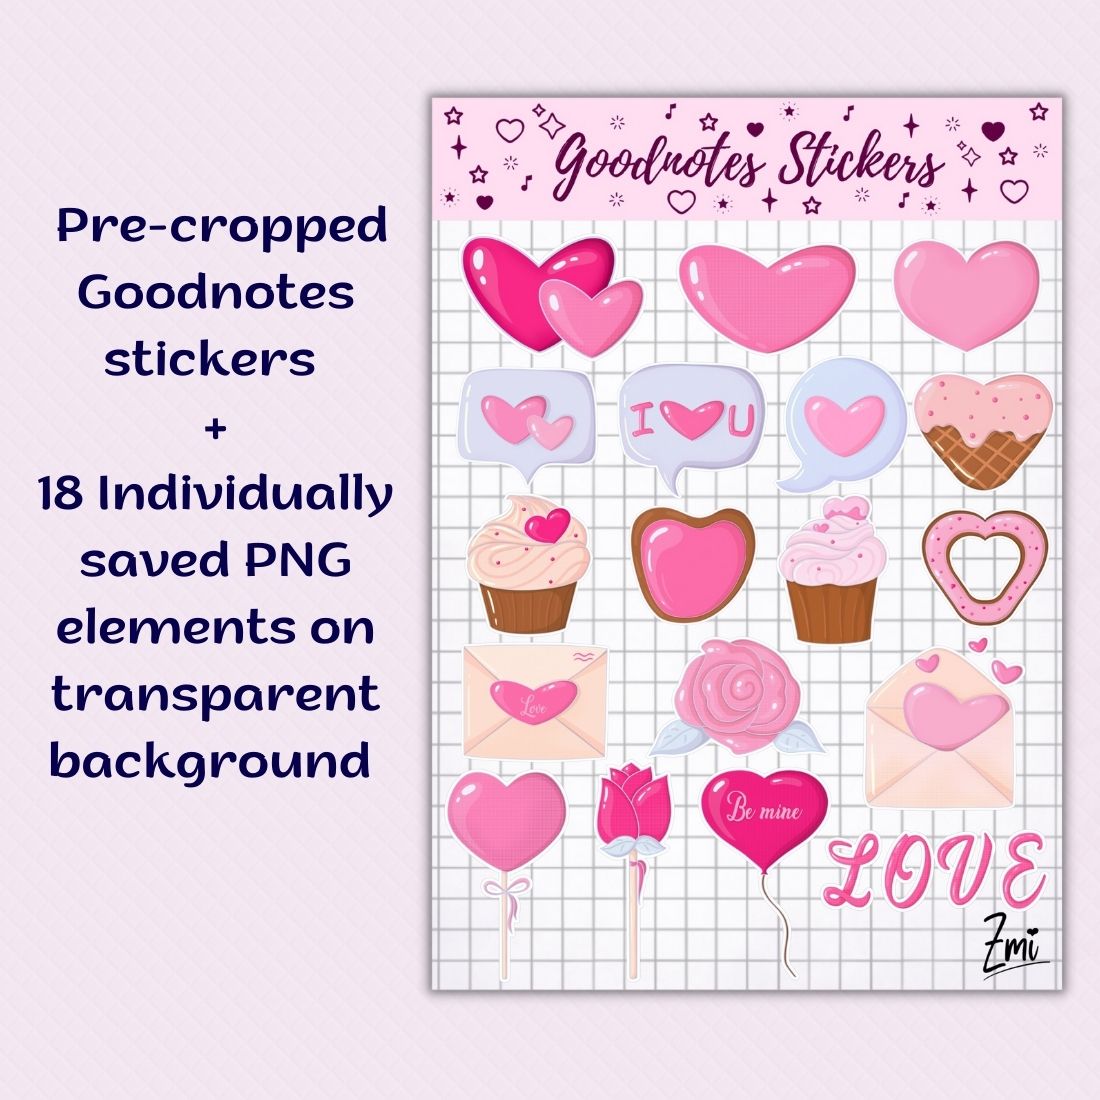 Valentines digital stickers pack cover image.